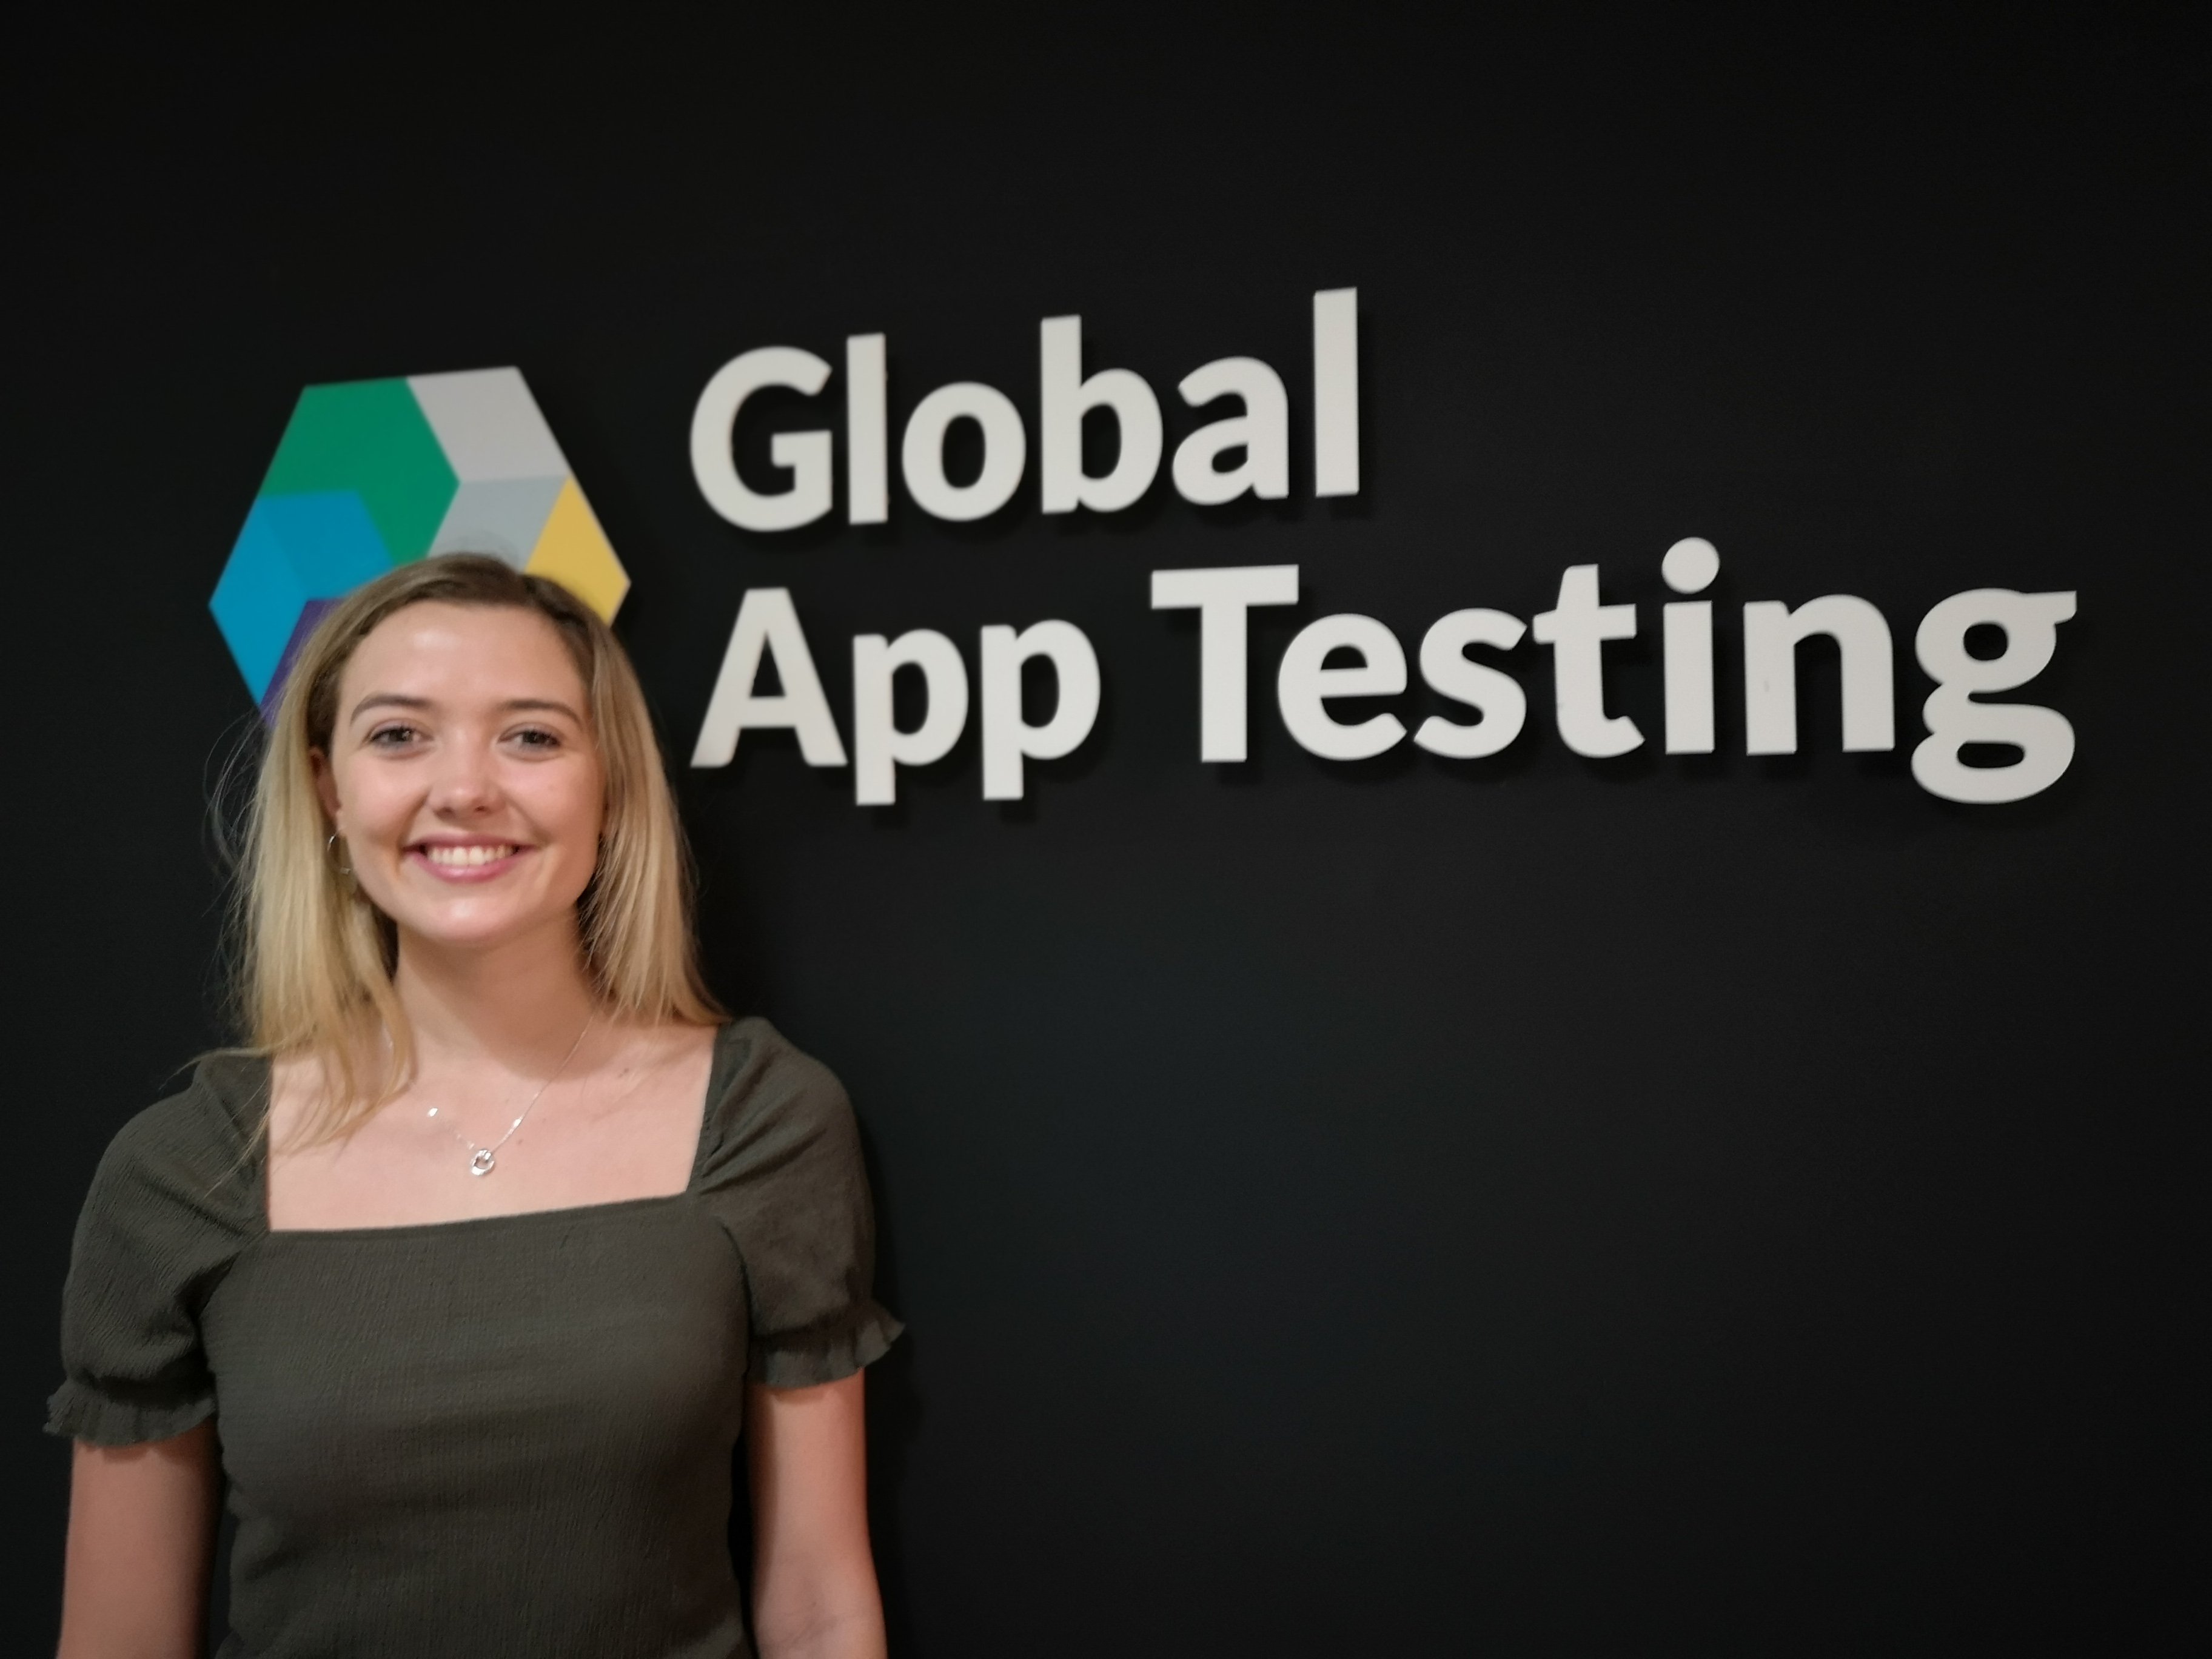 You Can Scale Your QA Team Globally Without Hiring Anyone: Here’s How post written by Amelia Whyman